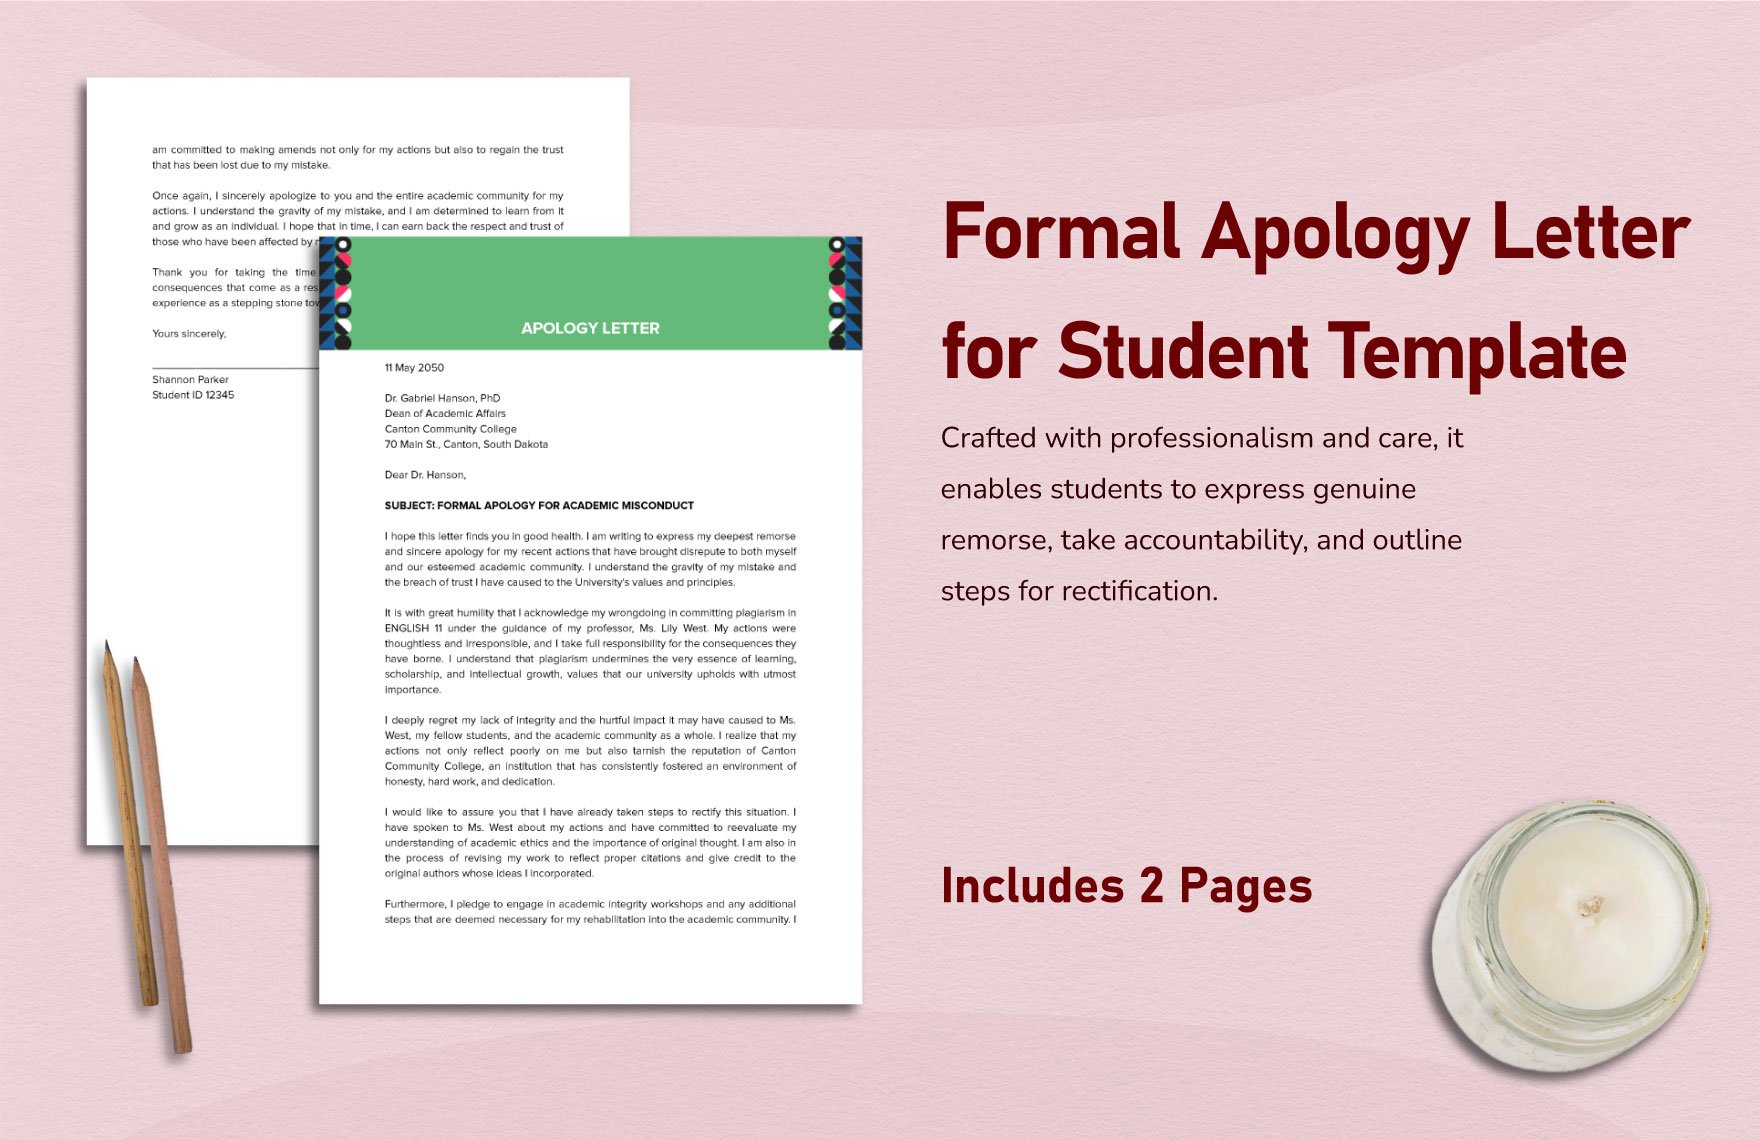 Formal Apology Letter for Student Template